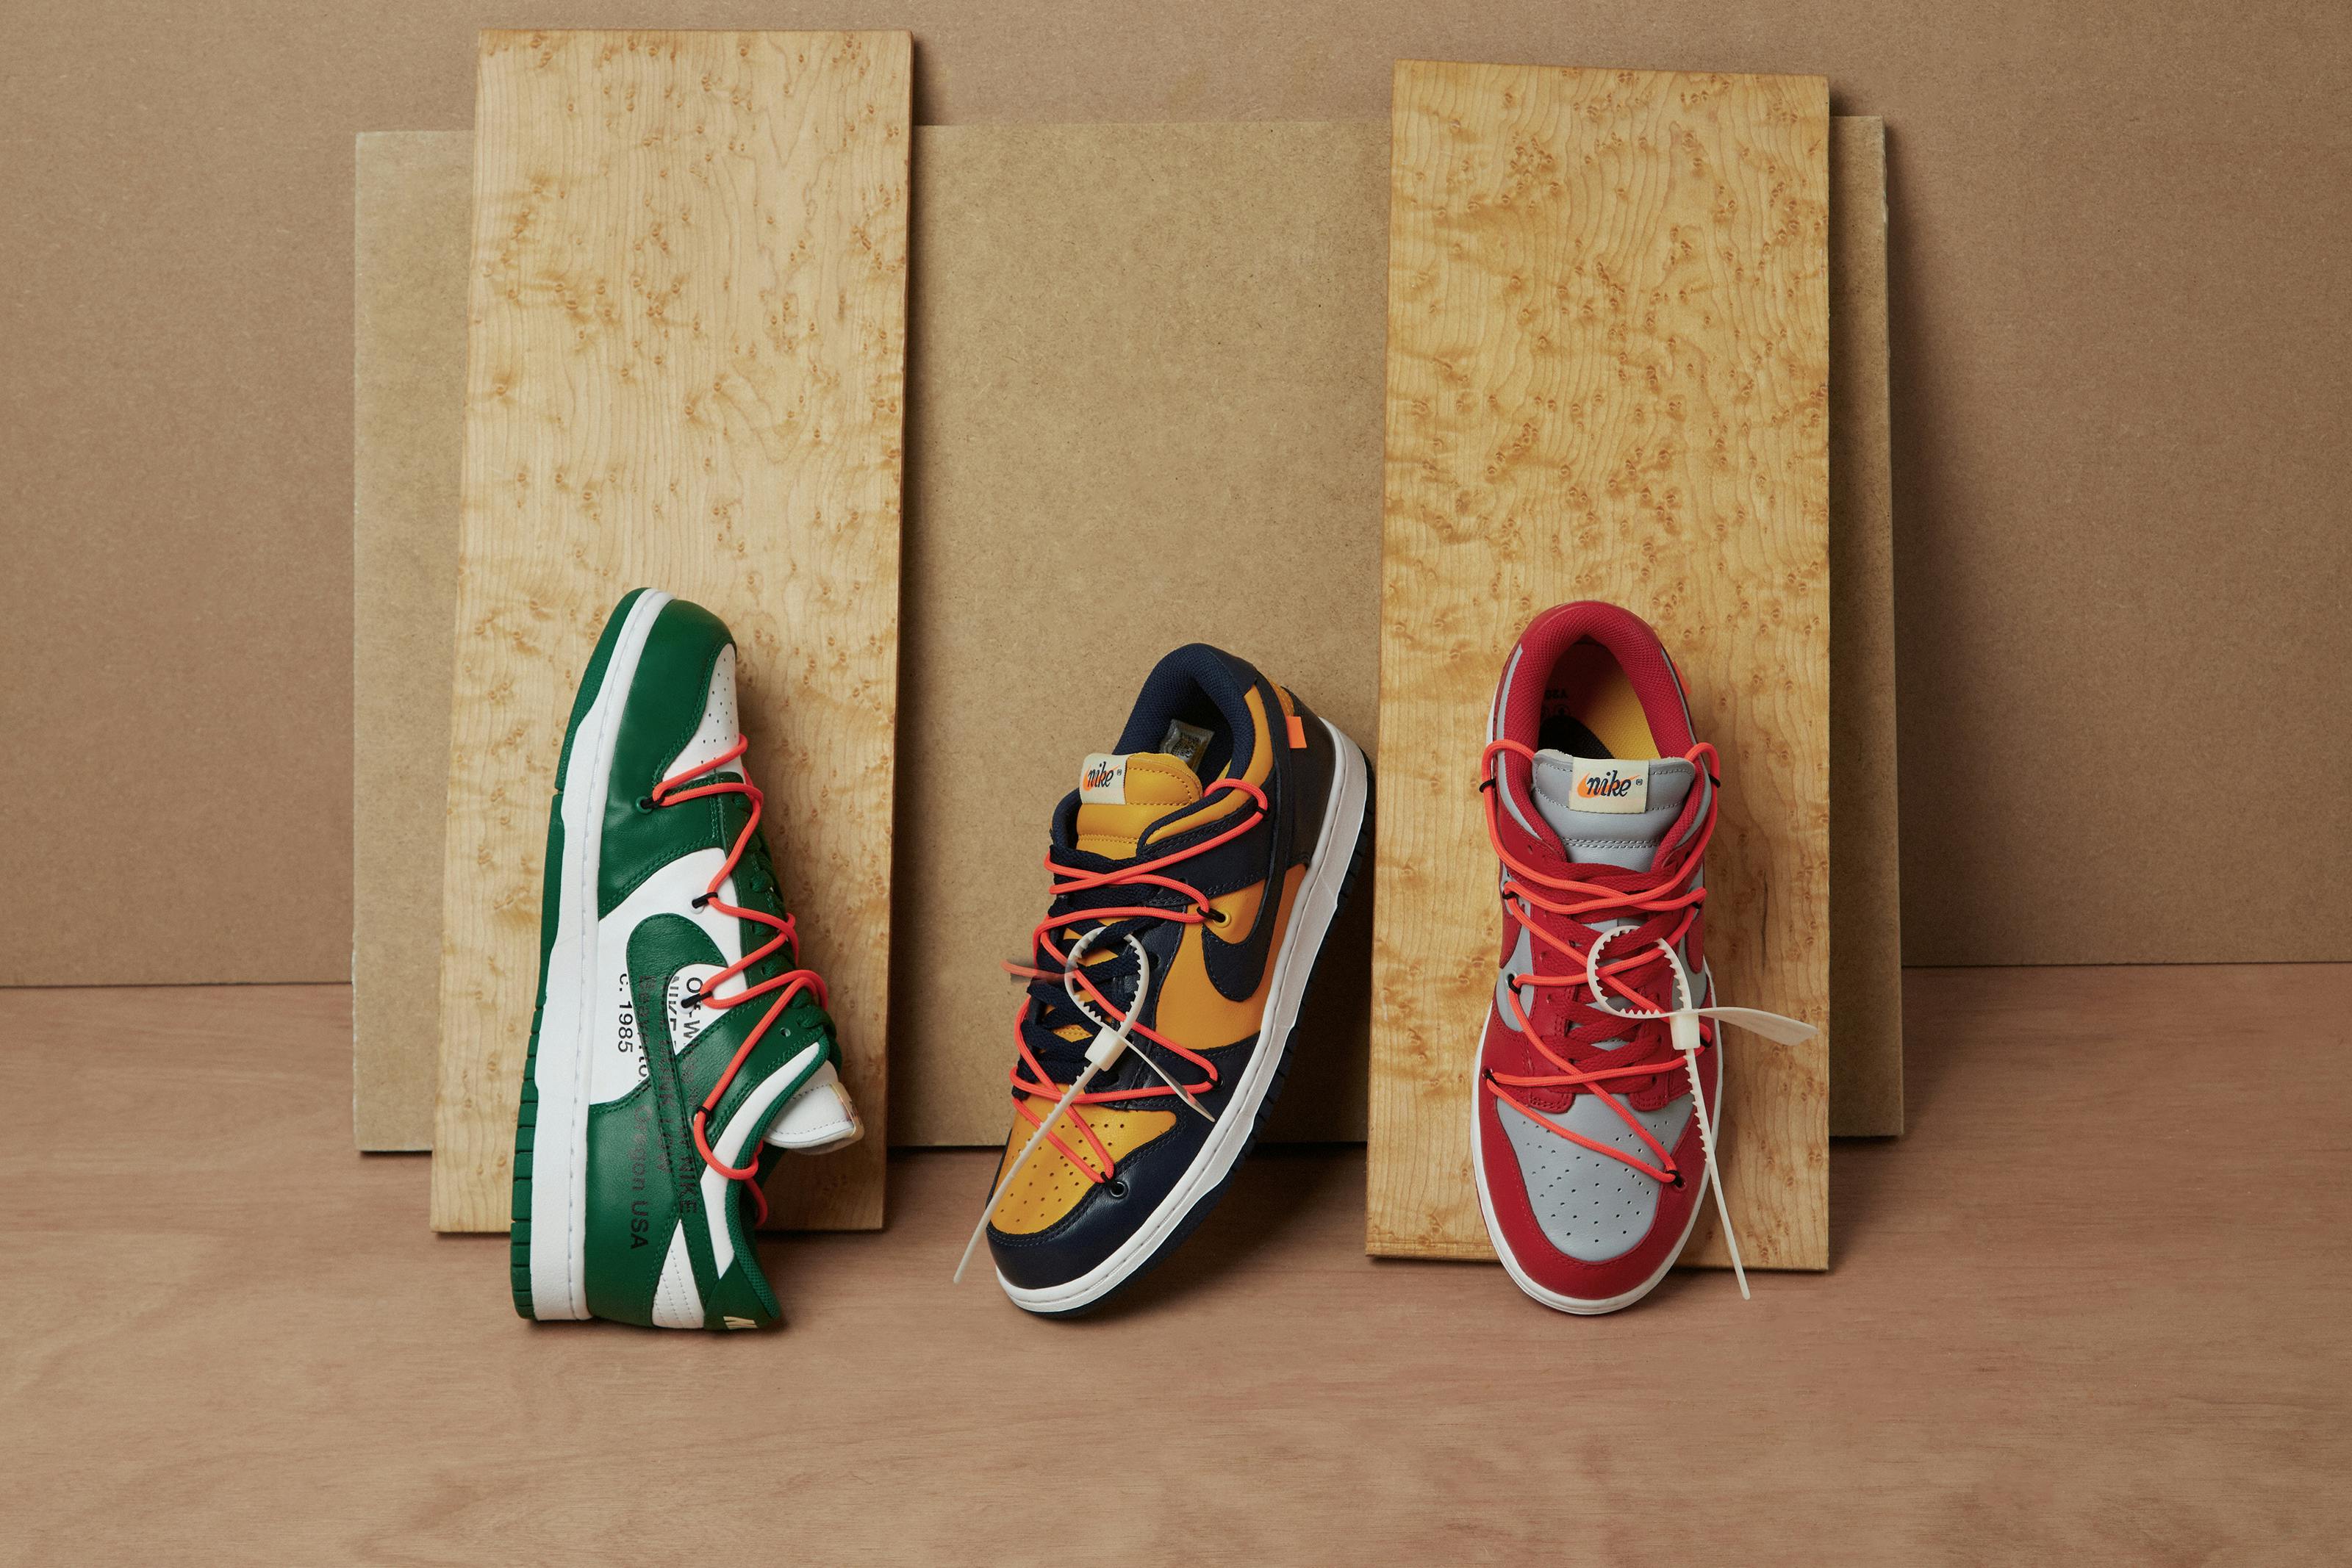 monarki evne etage END. Features | Nike x Off-White Dunk Low - Register Now on END. Launches